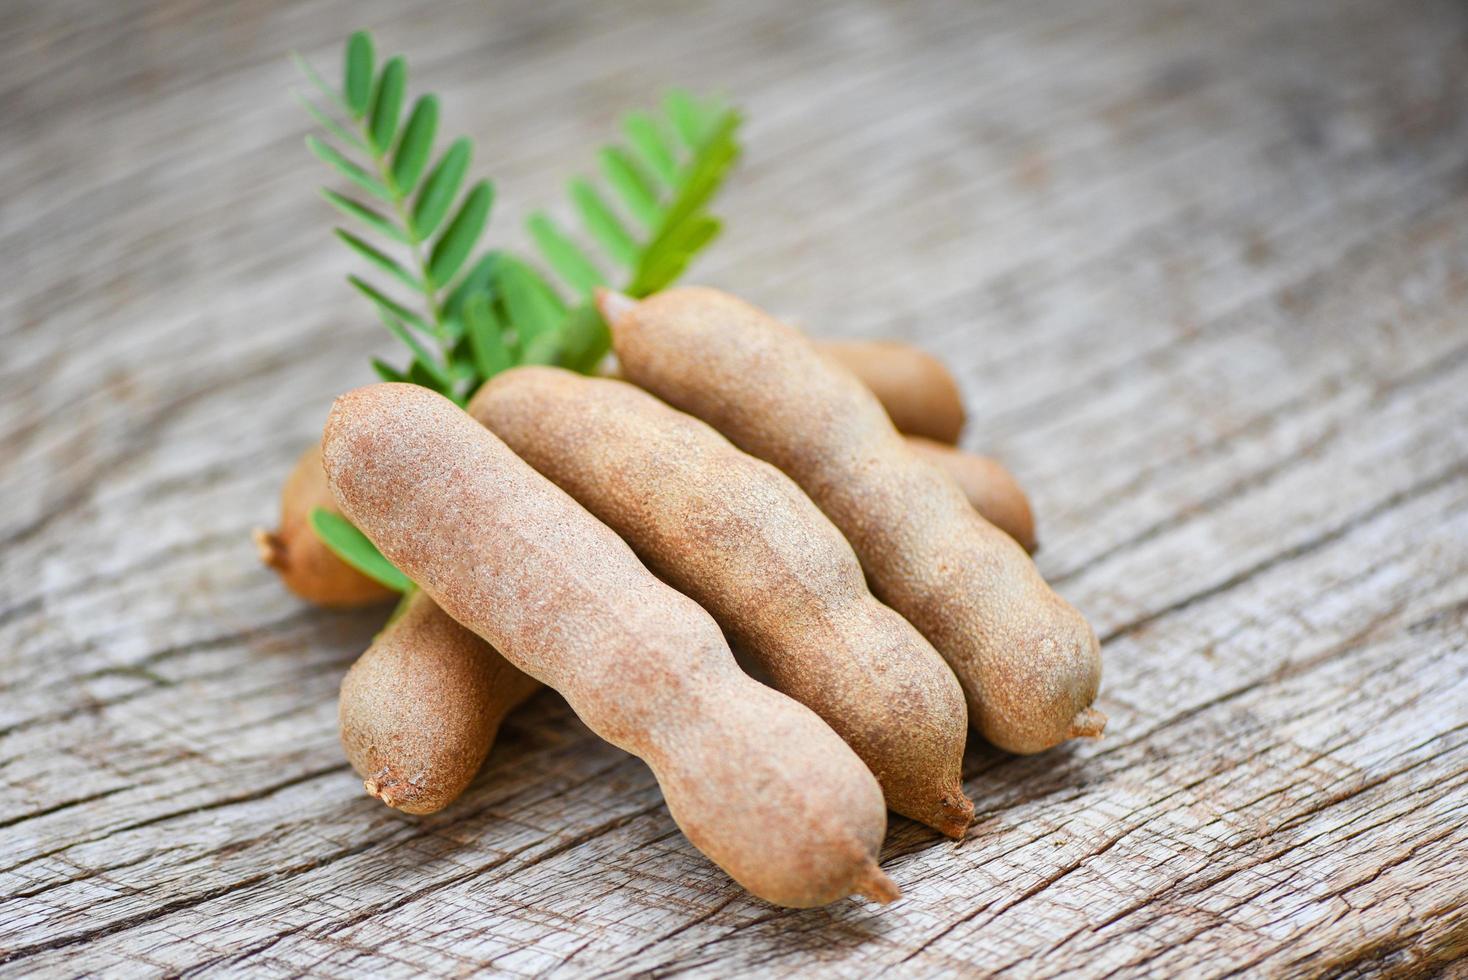 Sweet tamarind on wooden background - fresh tamarind fruits and leaves photo